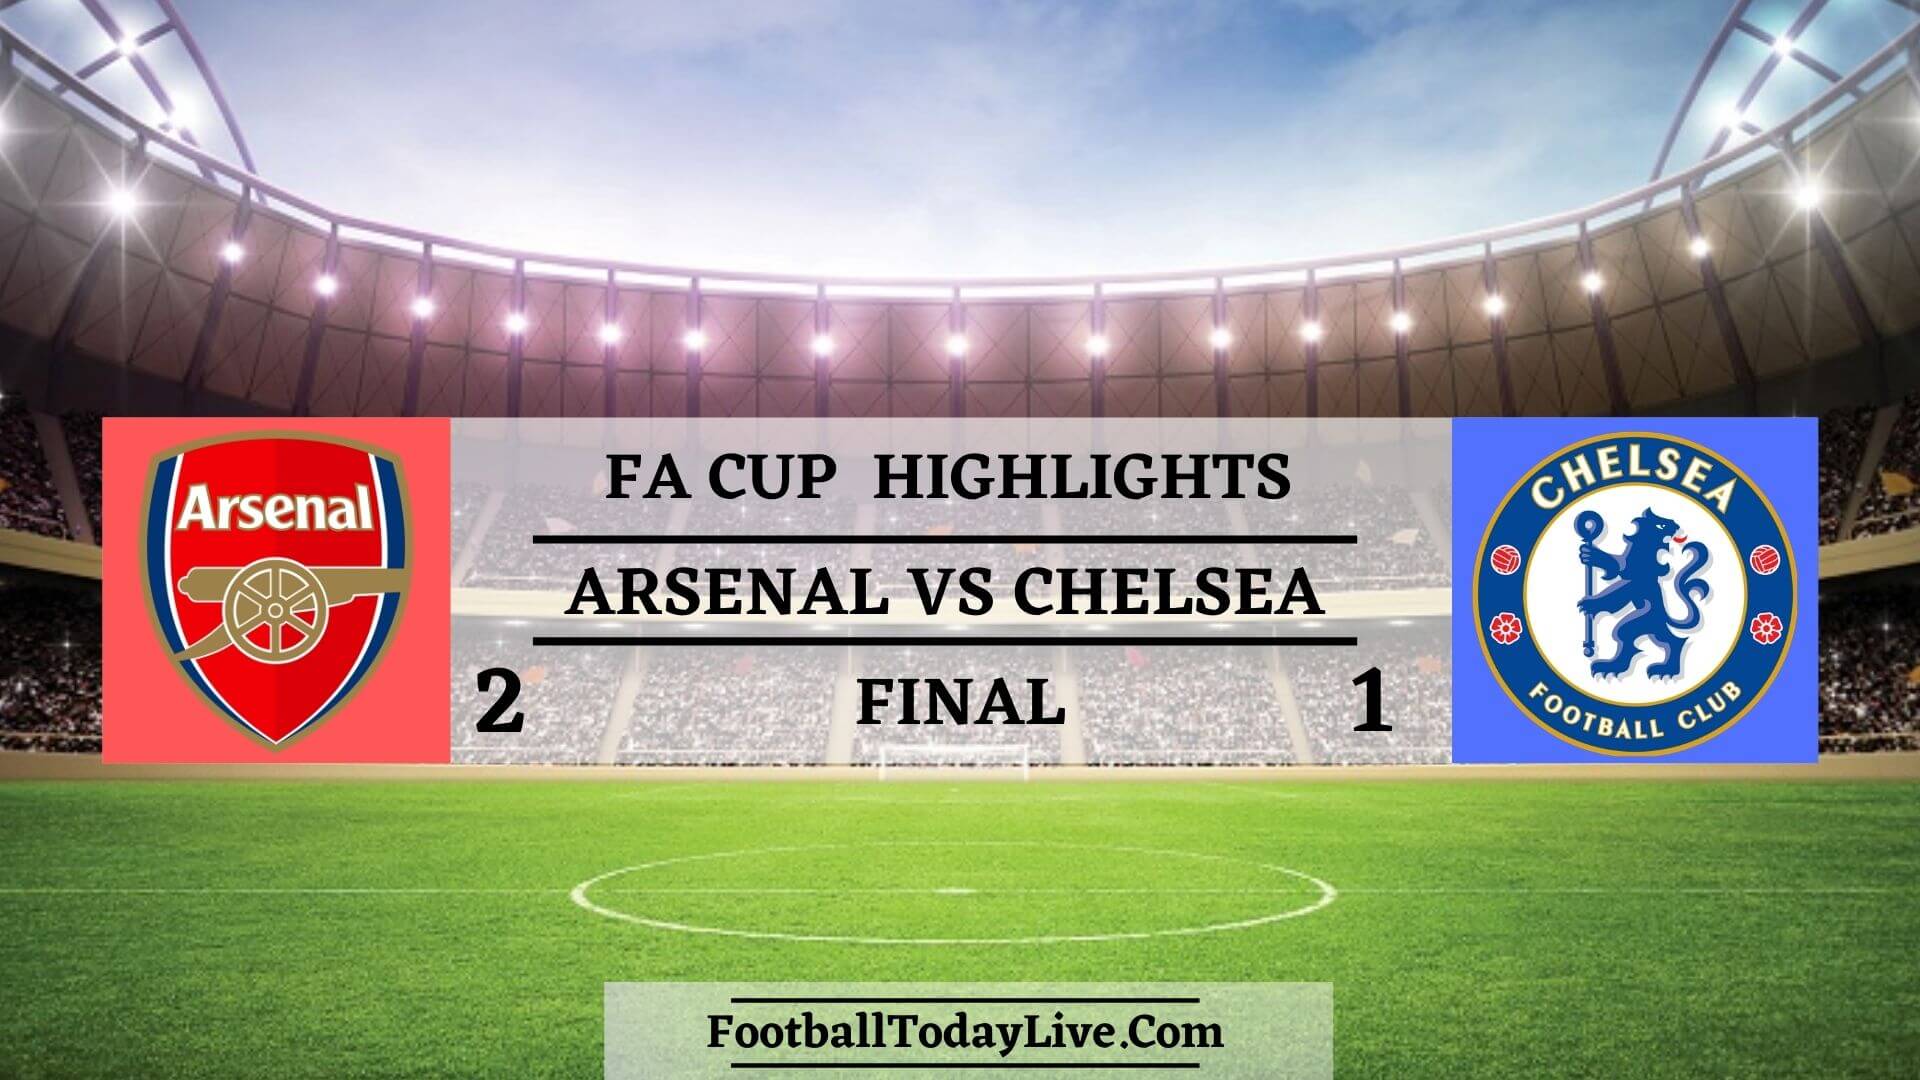 Arsenal Vs Chelsea Highlights 2020 FA Cup Final